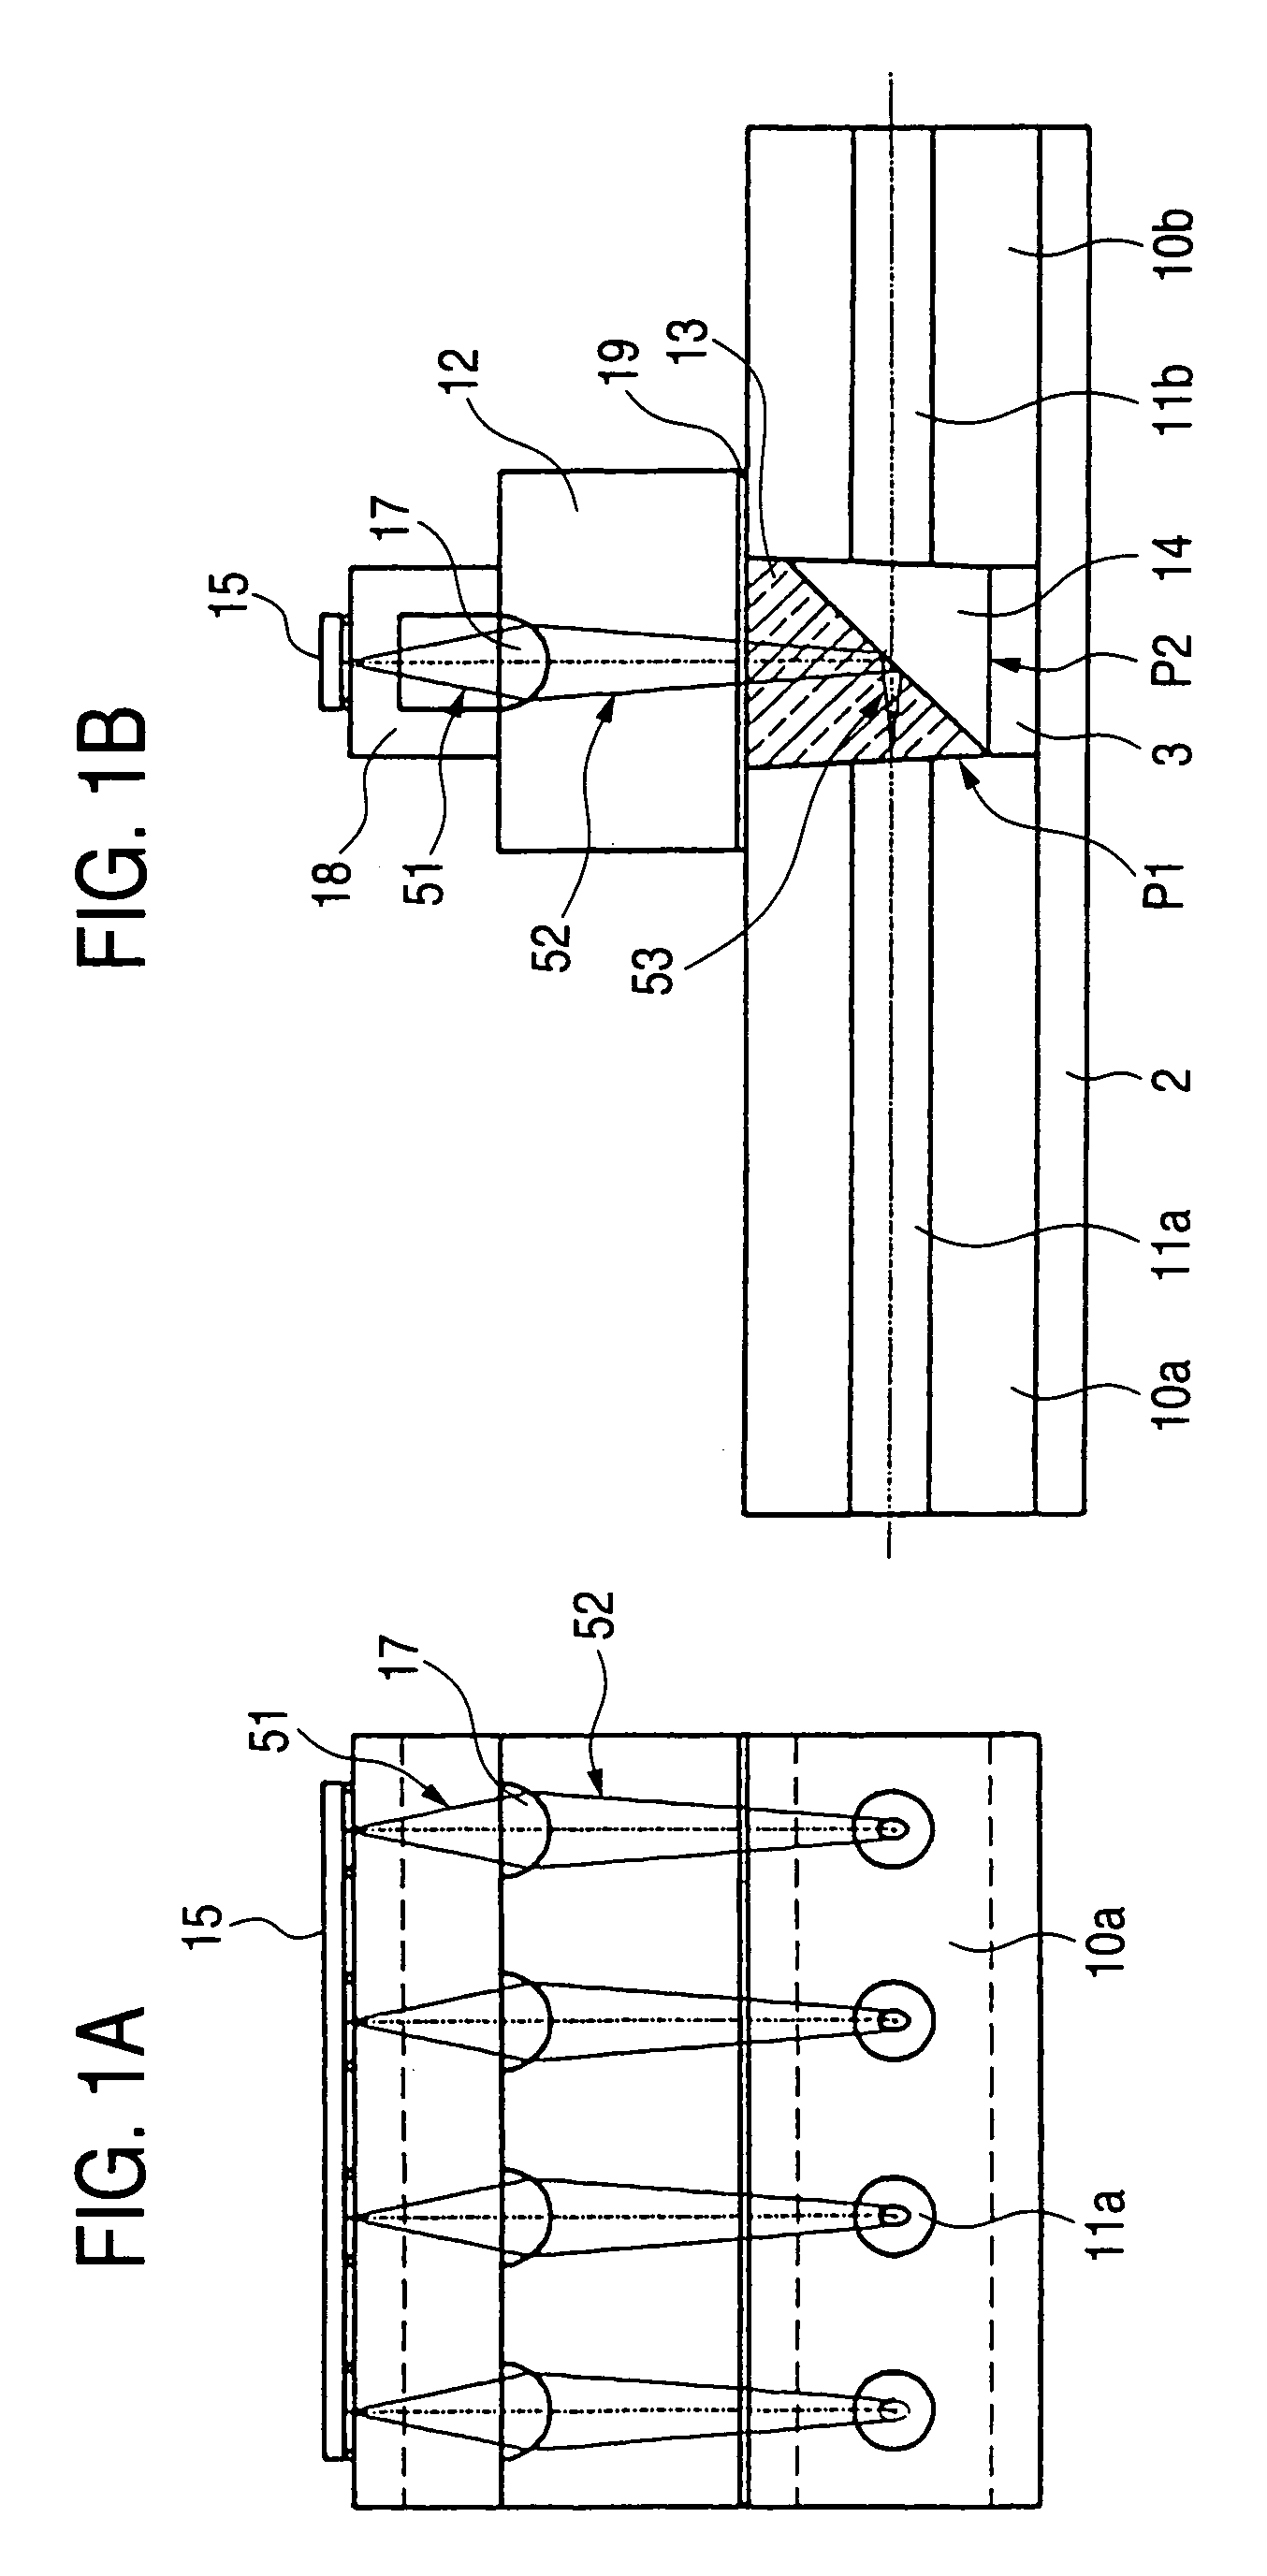 Optical connection device